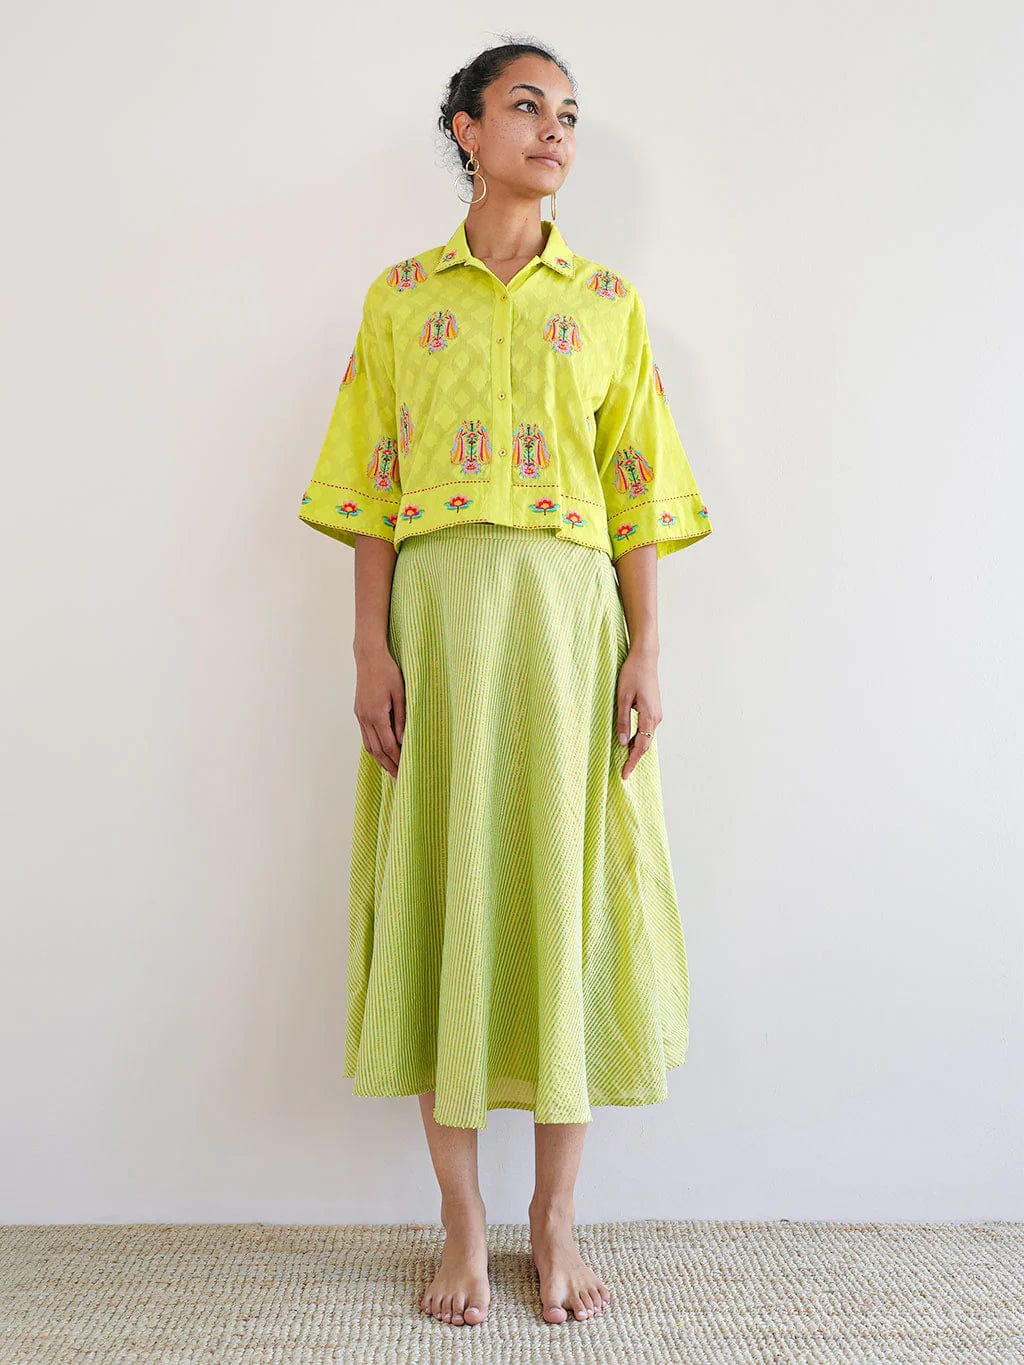 Nimo with Love Thyme Blouse Parrot Embroidery on Lime Jacquard